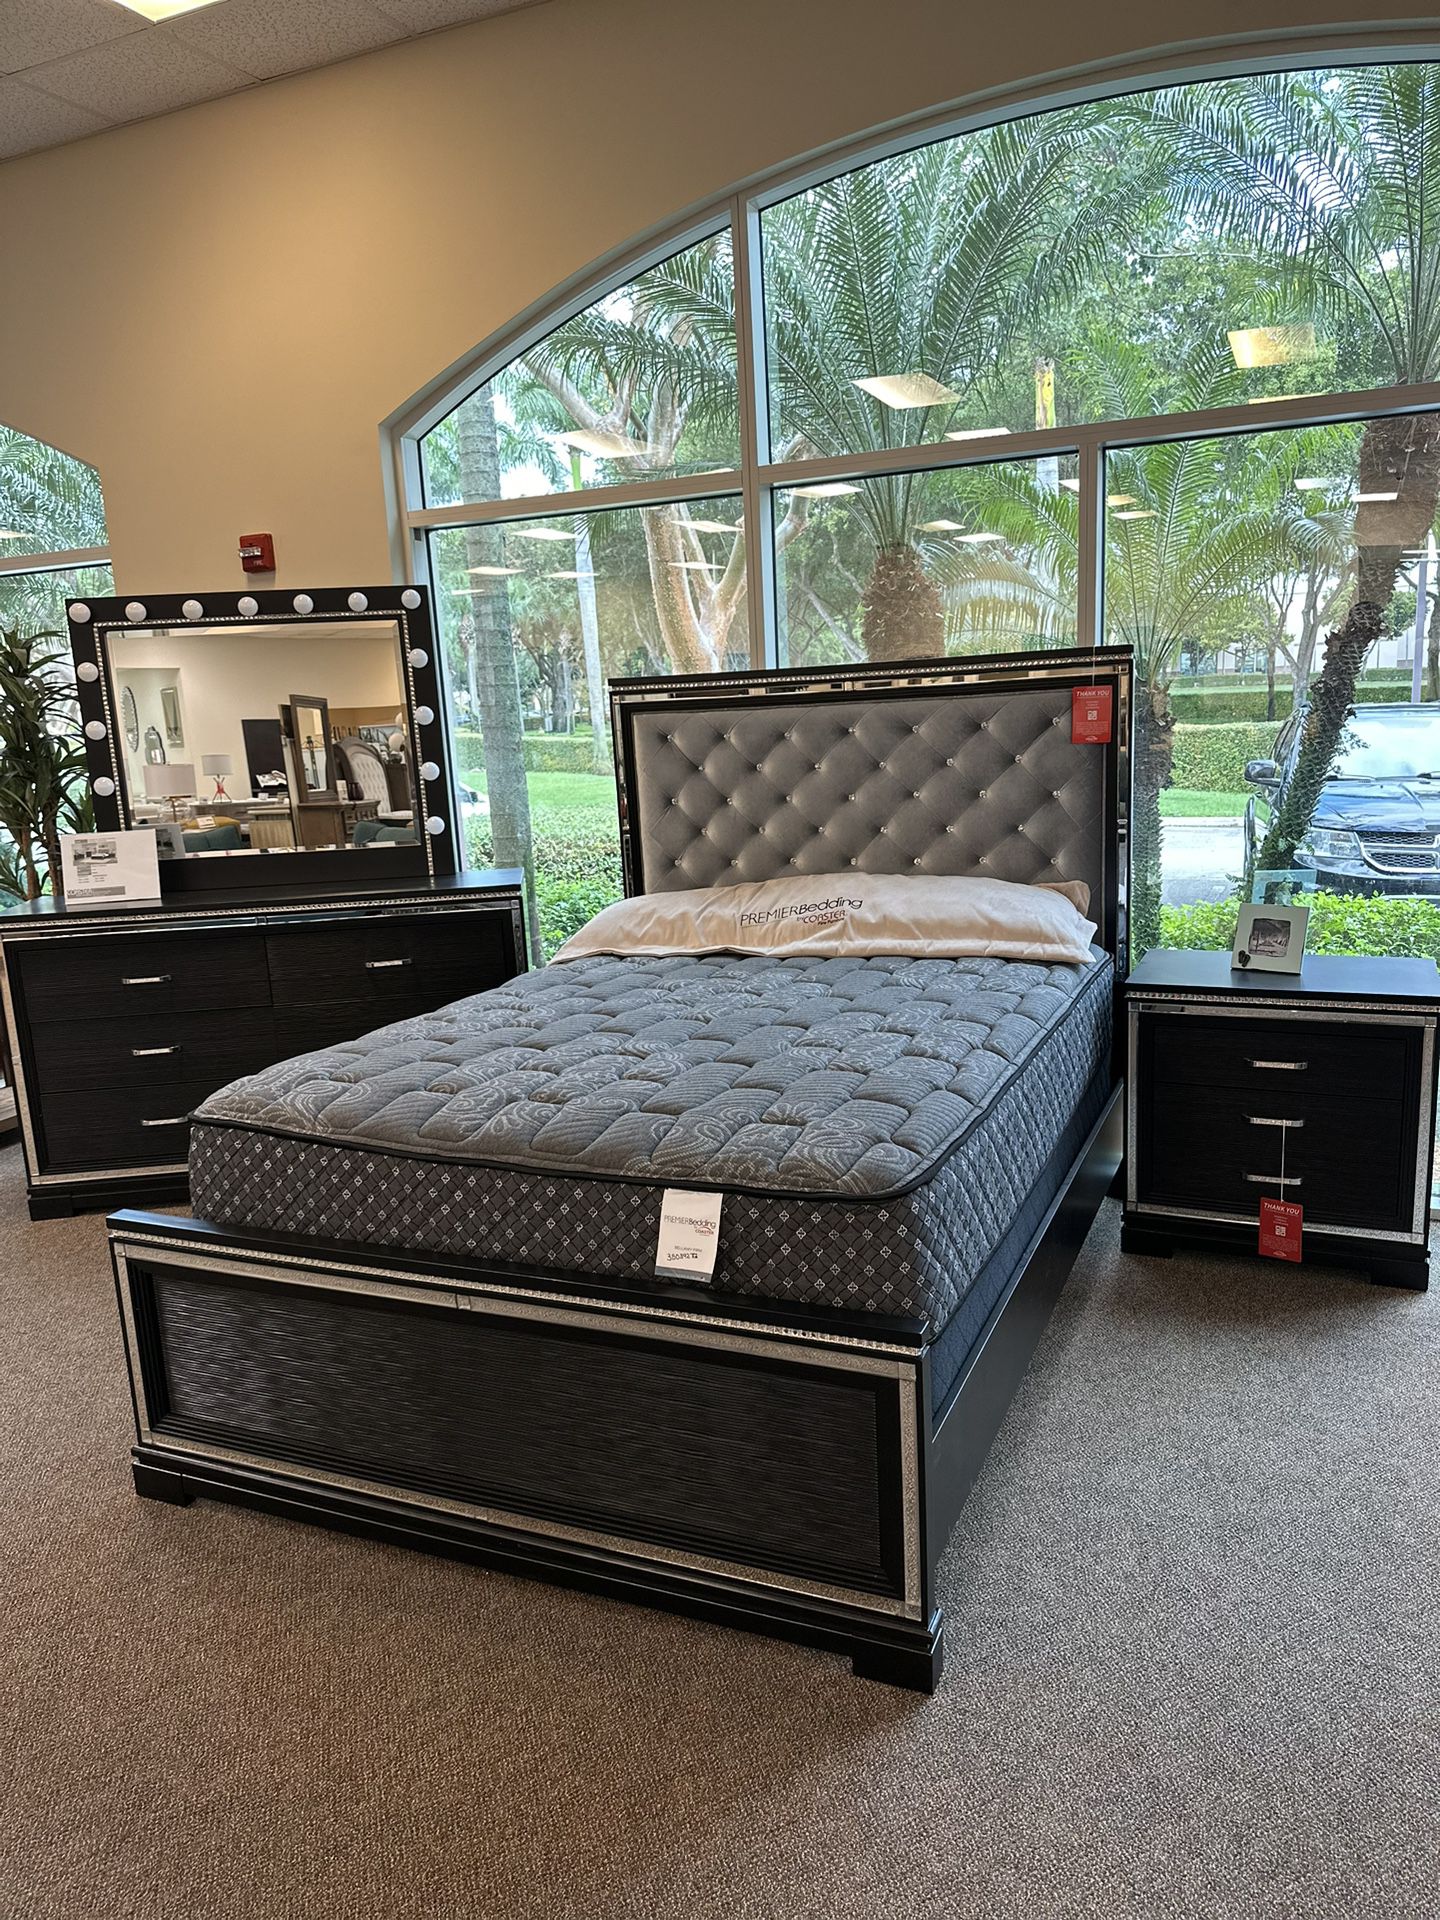 Brand new bed frame in box- Flexible Payment options available $39 down. (Limited supply). 